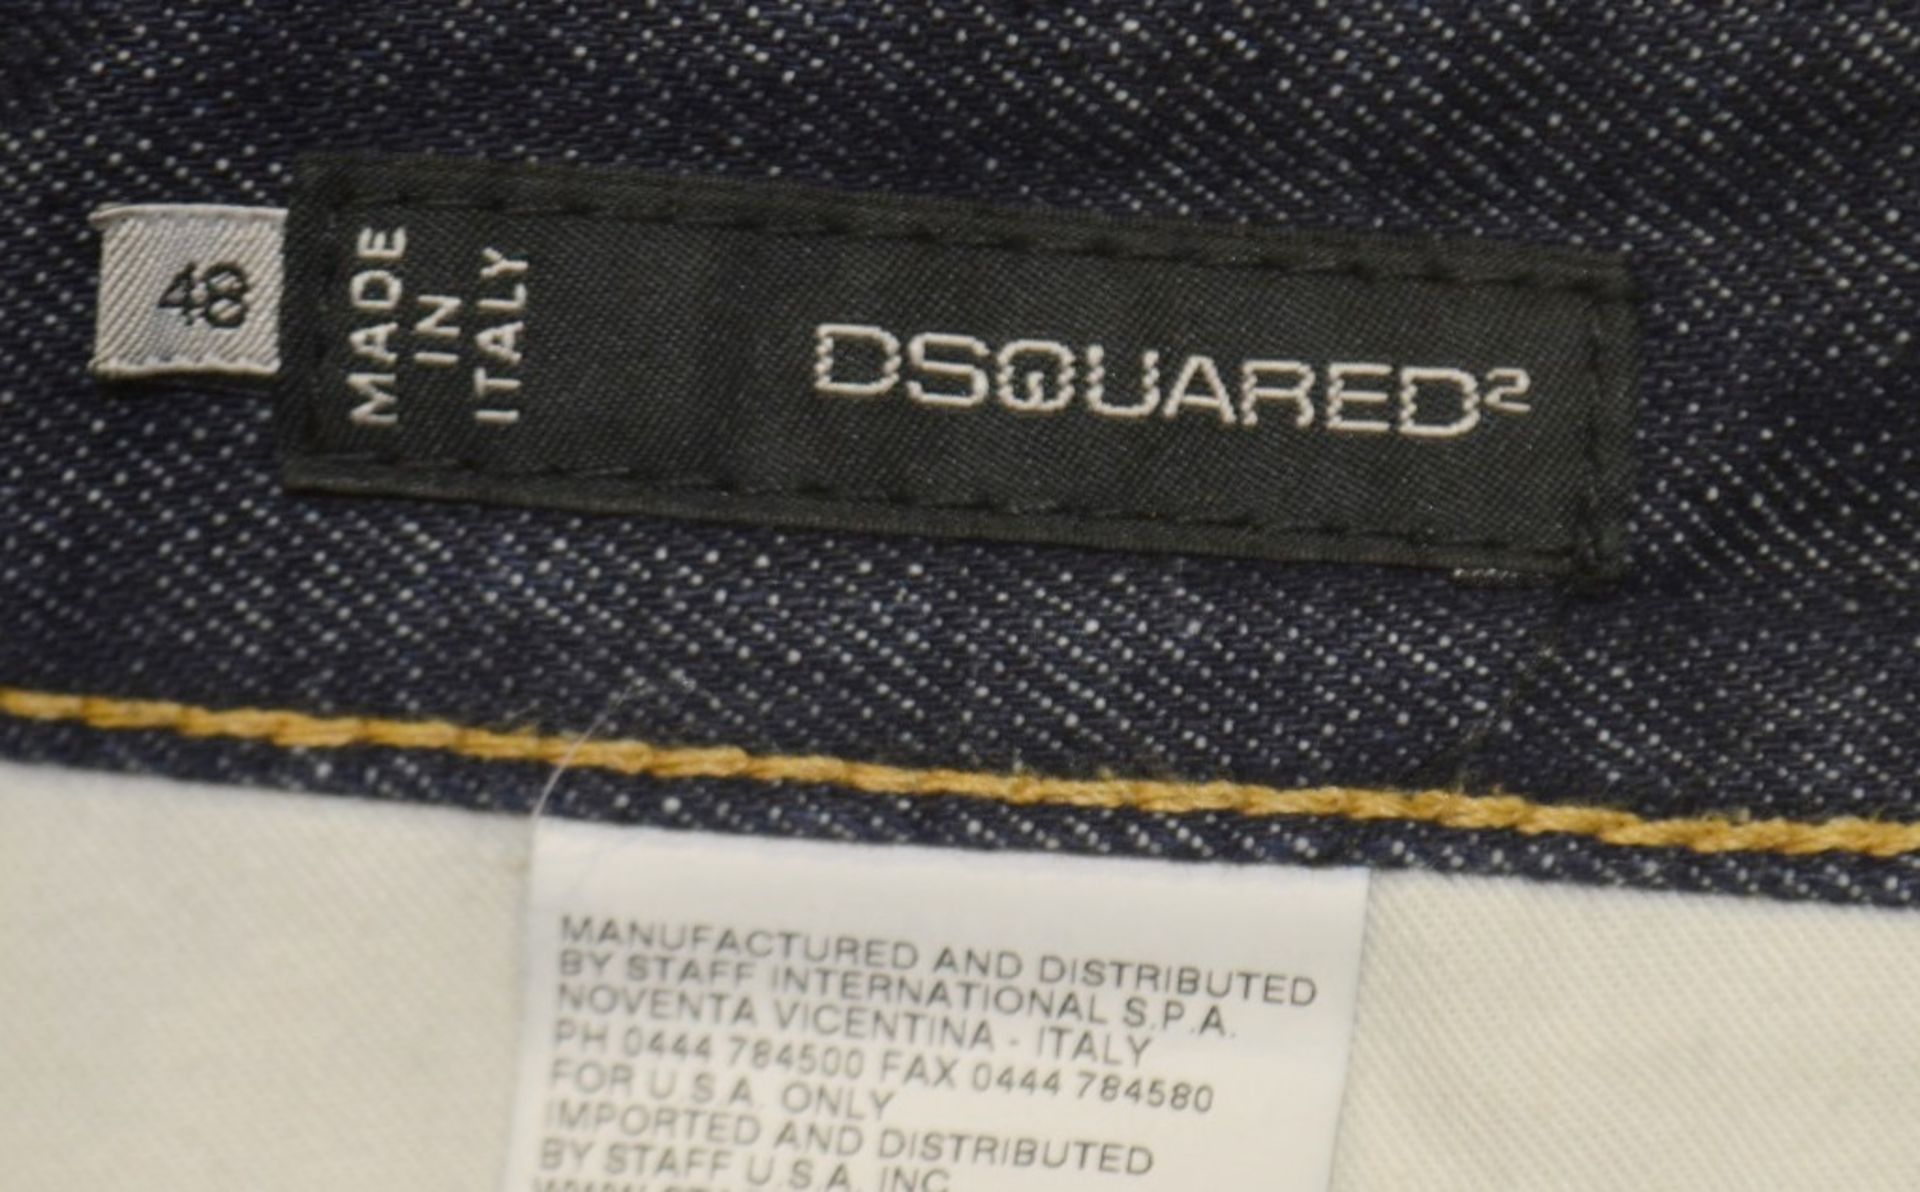 1 x Pair Of Men's Genuine Dsquared2 Designer Distressed-Style Jeans In Dark Blue - Size: UK32 - Image 4 of 8